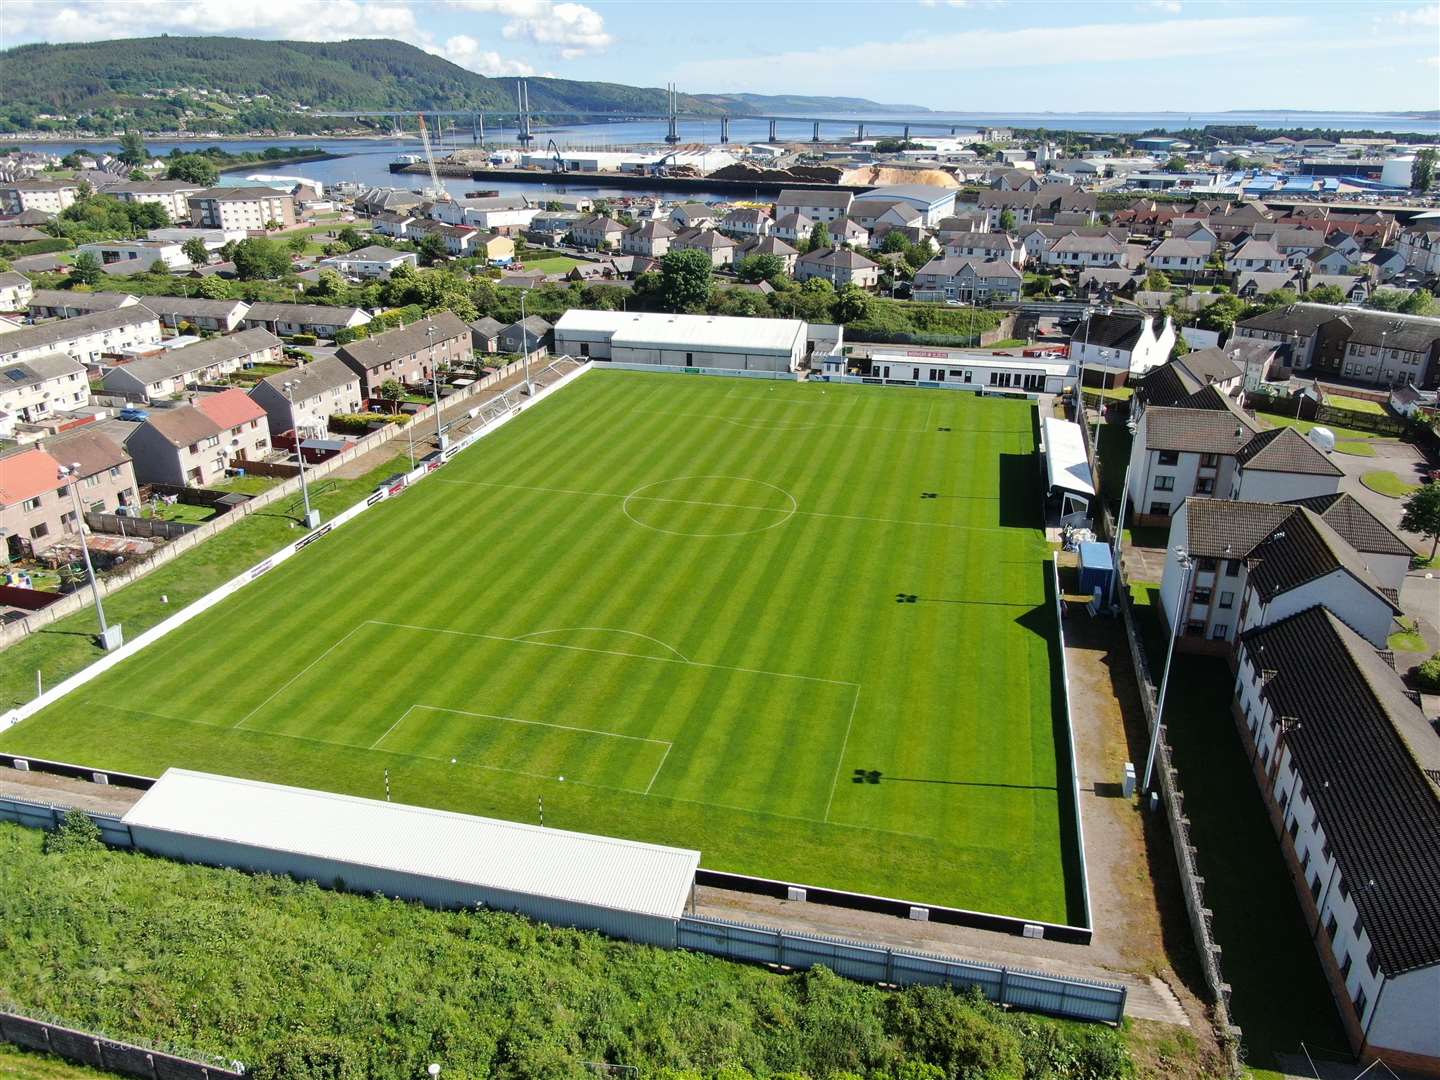 Clach's home ground is Grant Street Park.